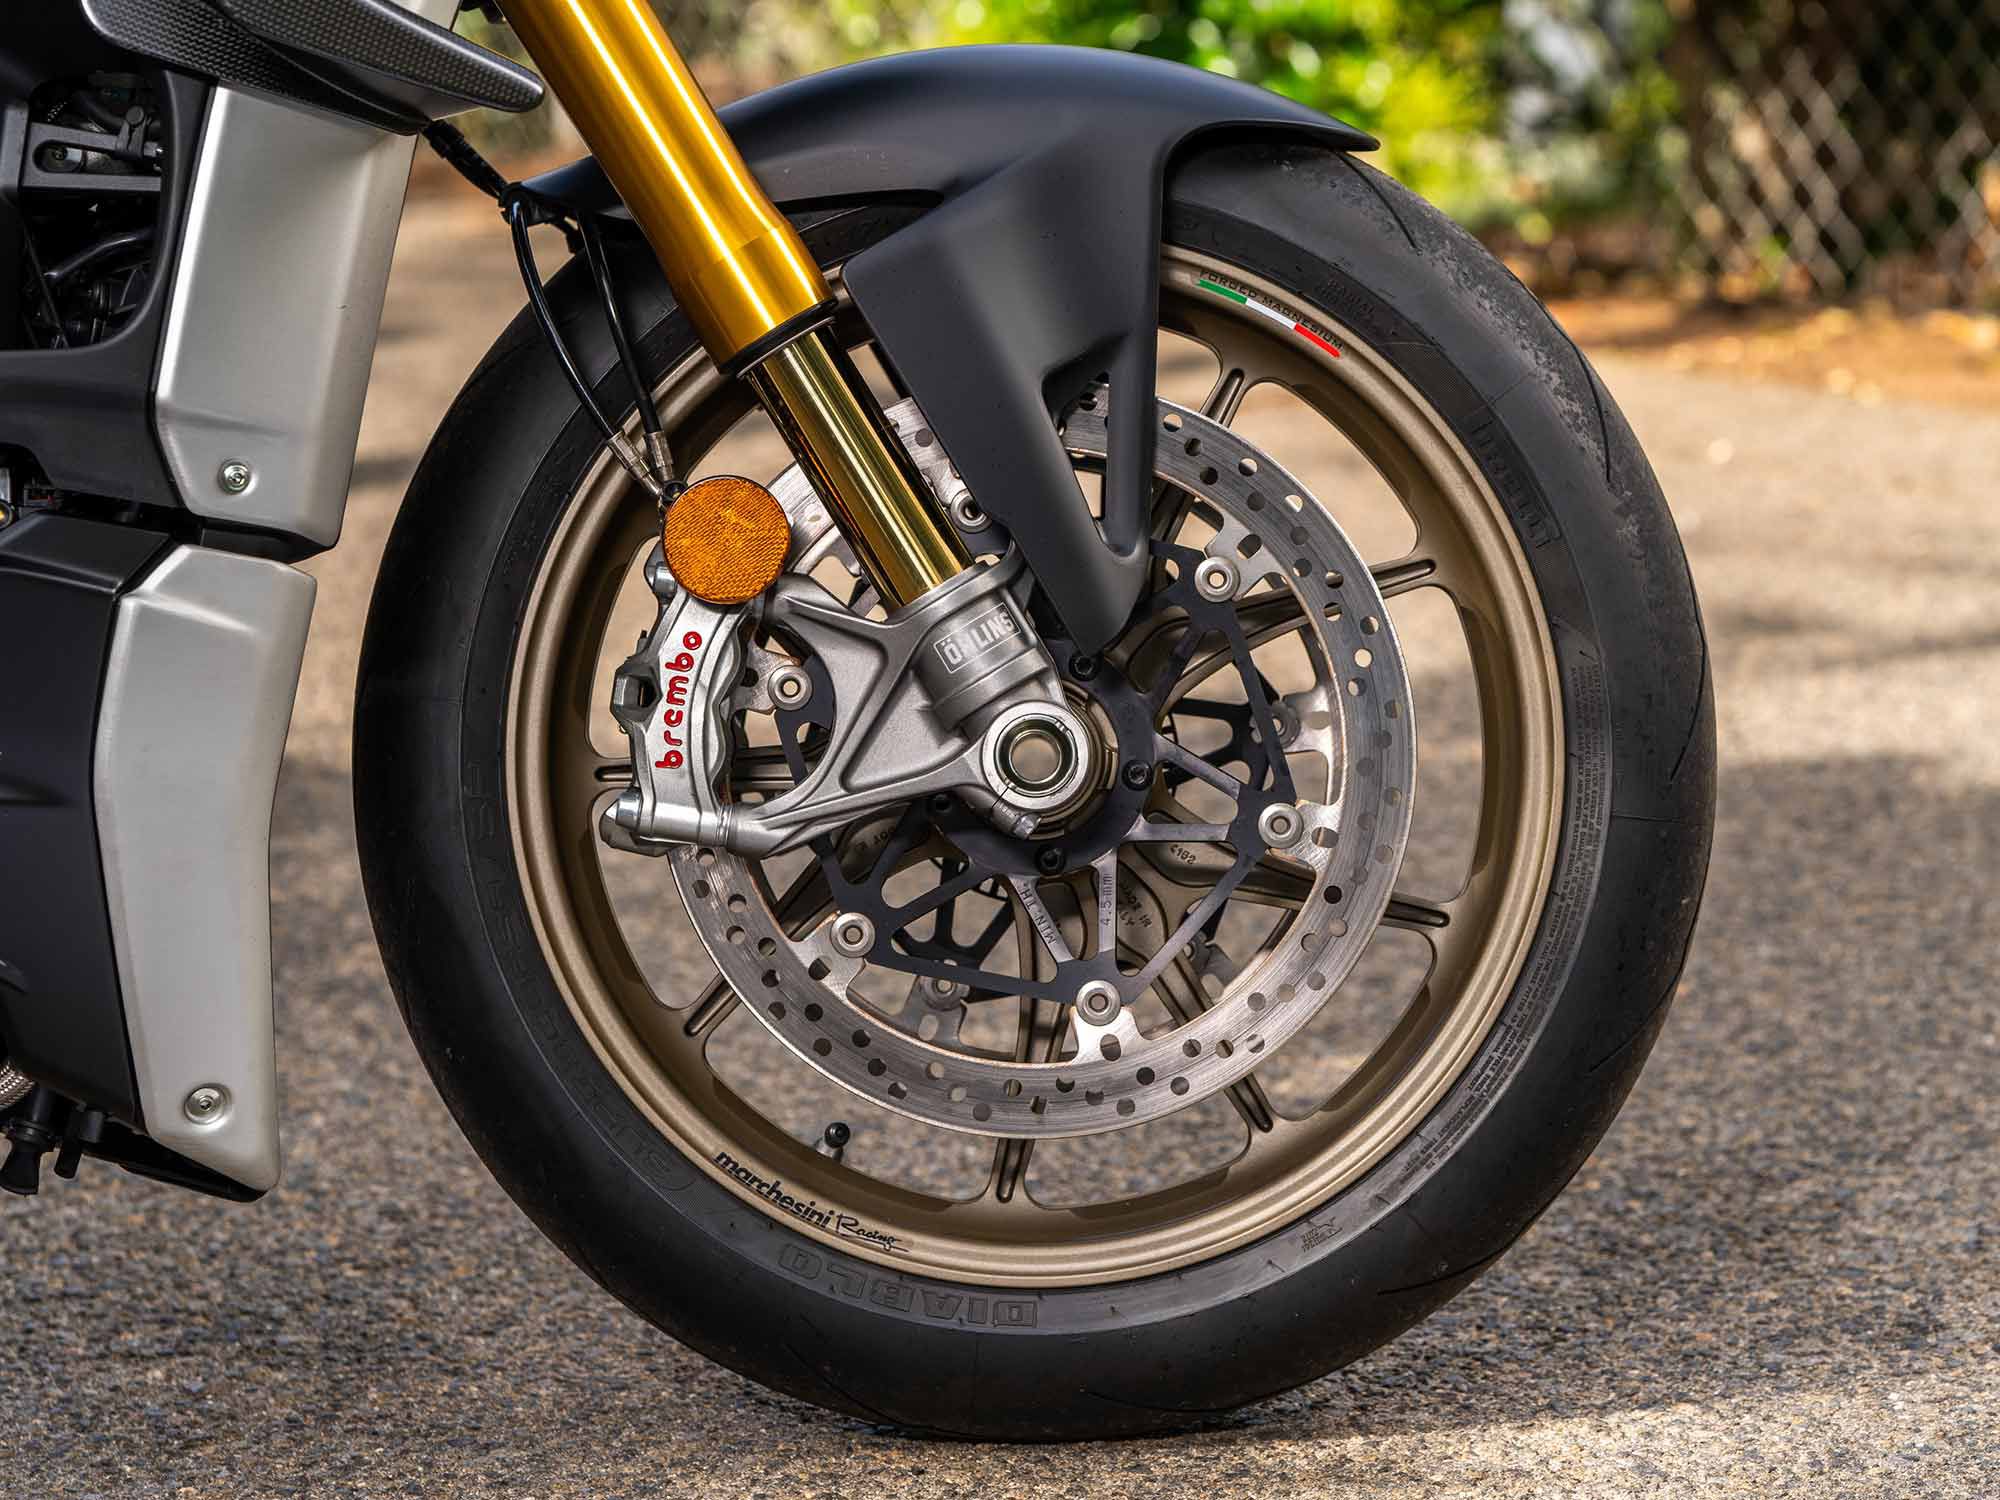 This Streetfighter V4 S project bike rolls on a set of forged magnesium wheels from Marchesini ($5,227.50). The wheels are 1.5-pound lighter than the forged alloy setup on the V4 S